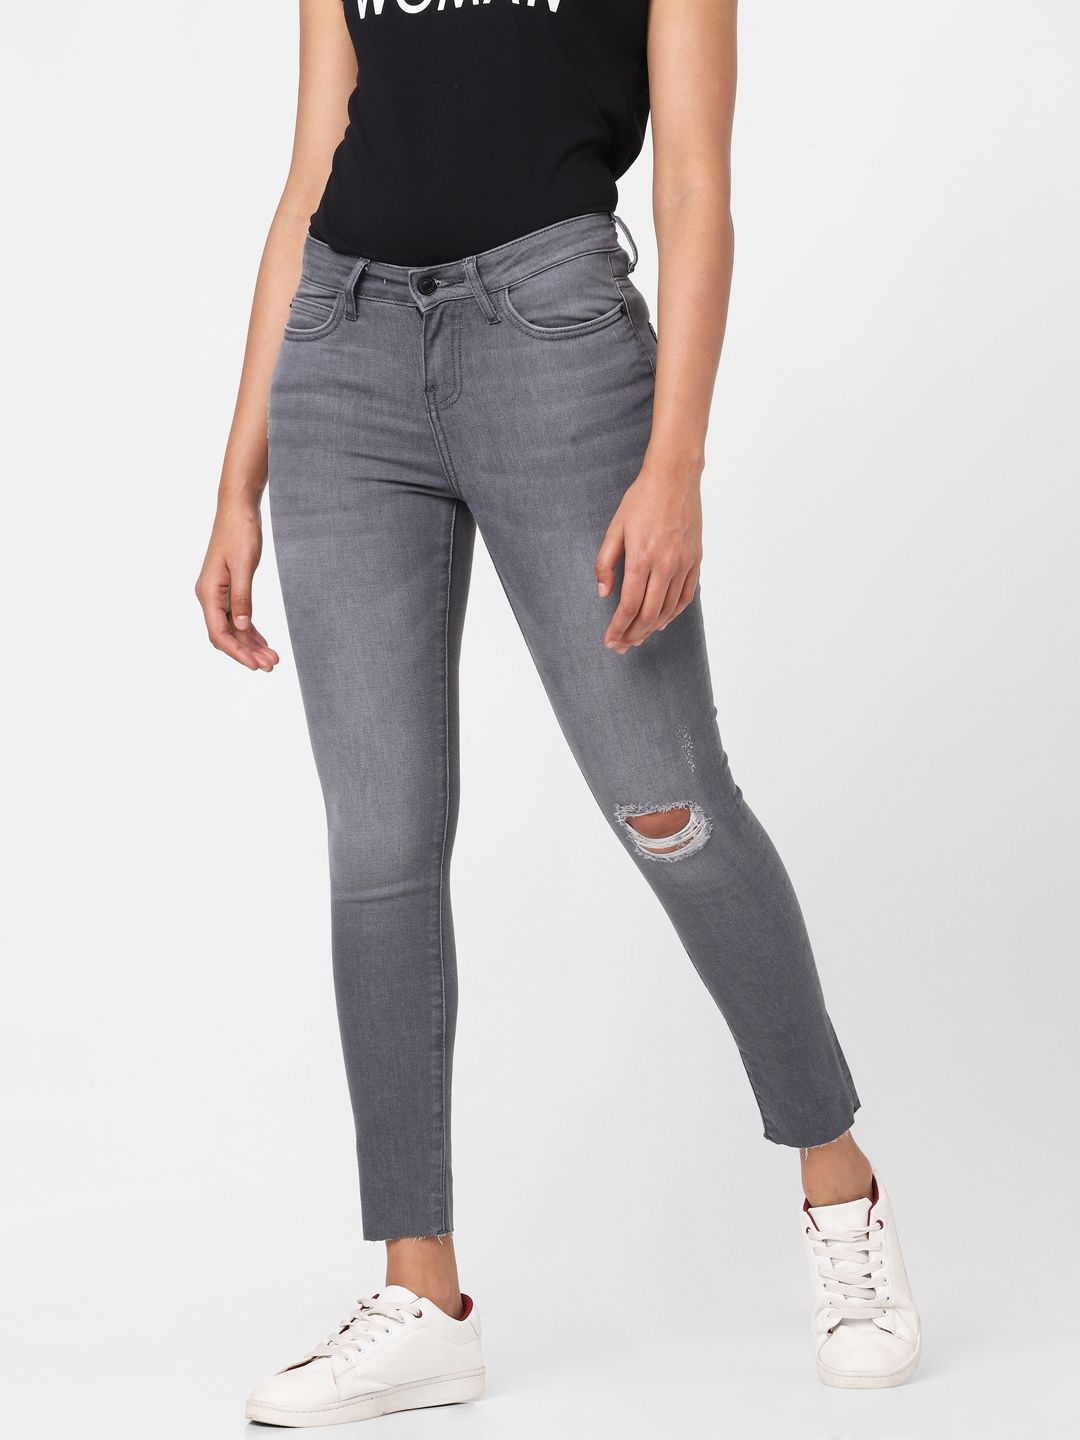 Vero Moda Women Grey Skinny Fit Mildly Distressed Light Fade Mid-Rise Stretchable Jeans Price in India